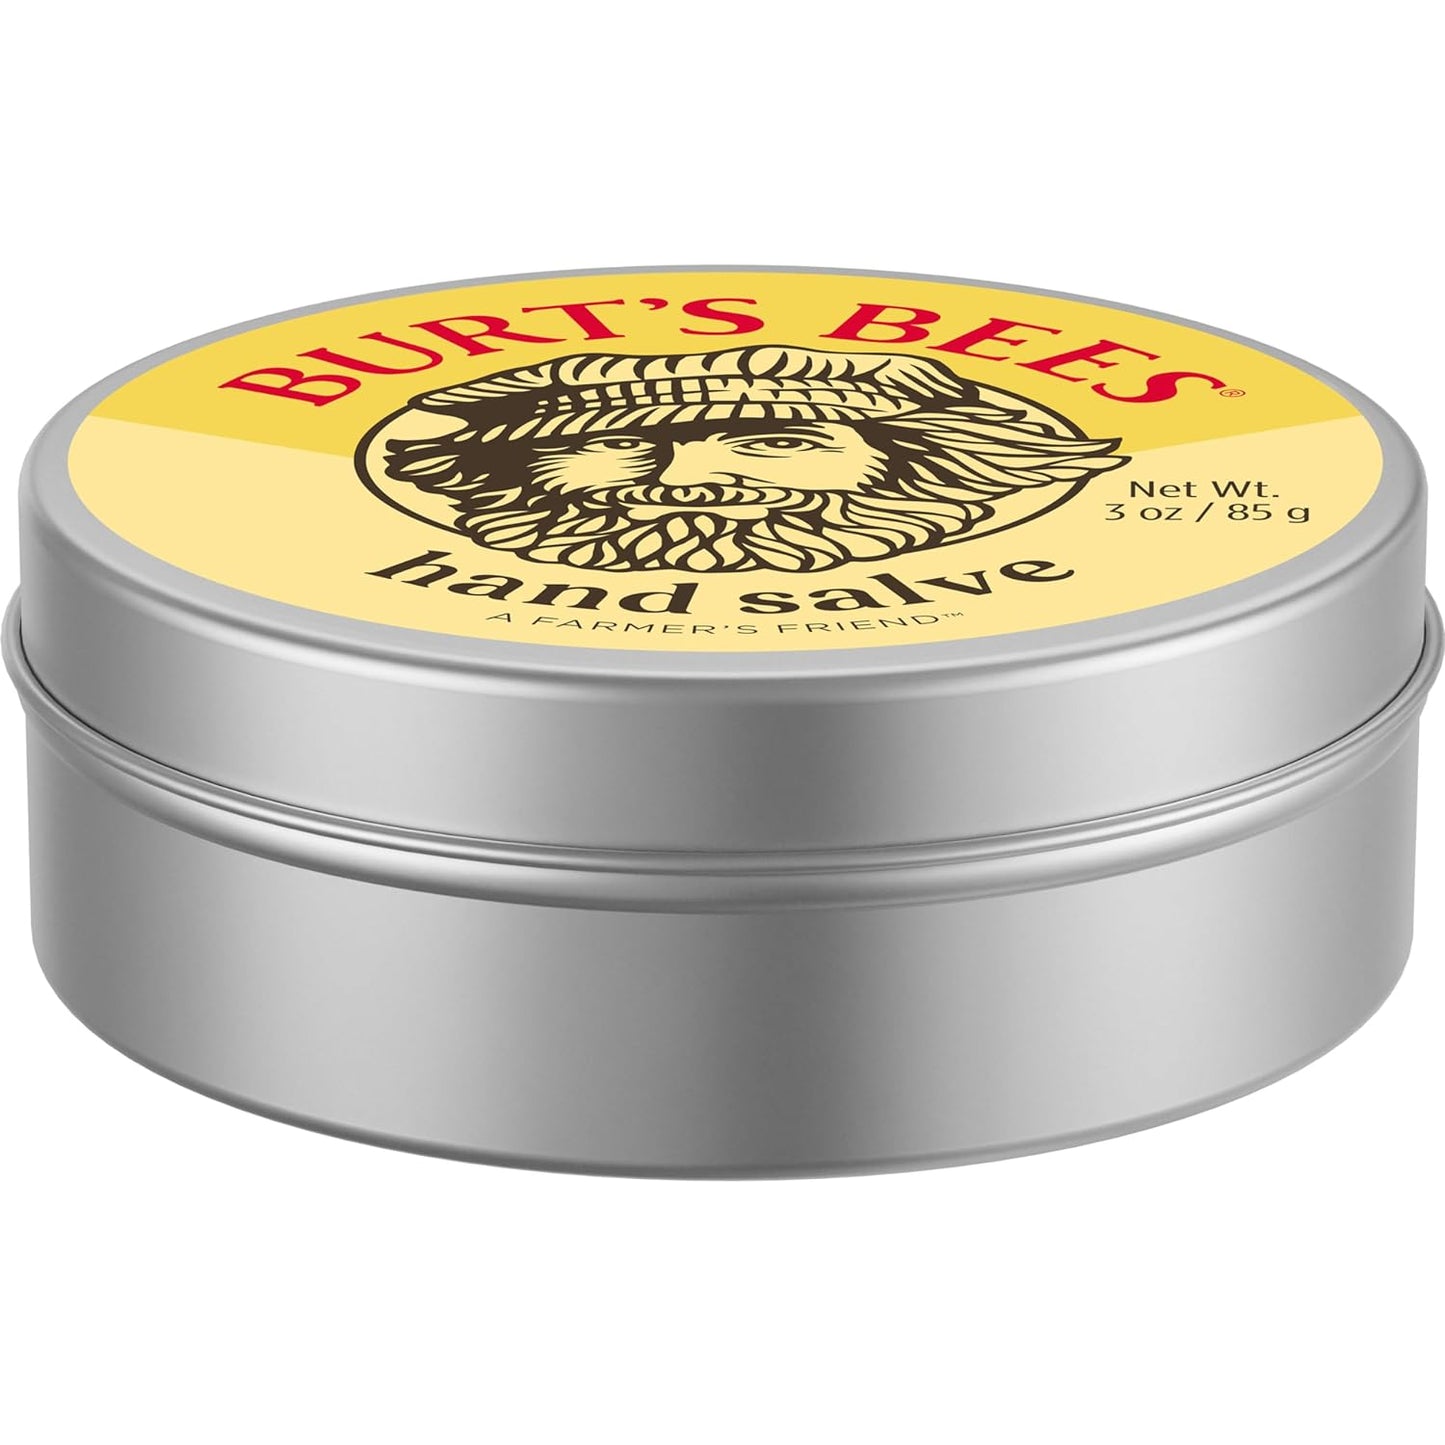 "Ultimate Hand Moisturizing Balm: Hydrating Salve for Dry Skin with Beeswax - 100% Natural, 3 Ounce"